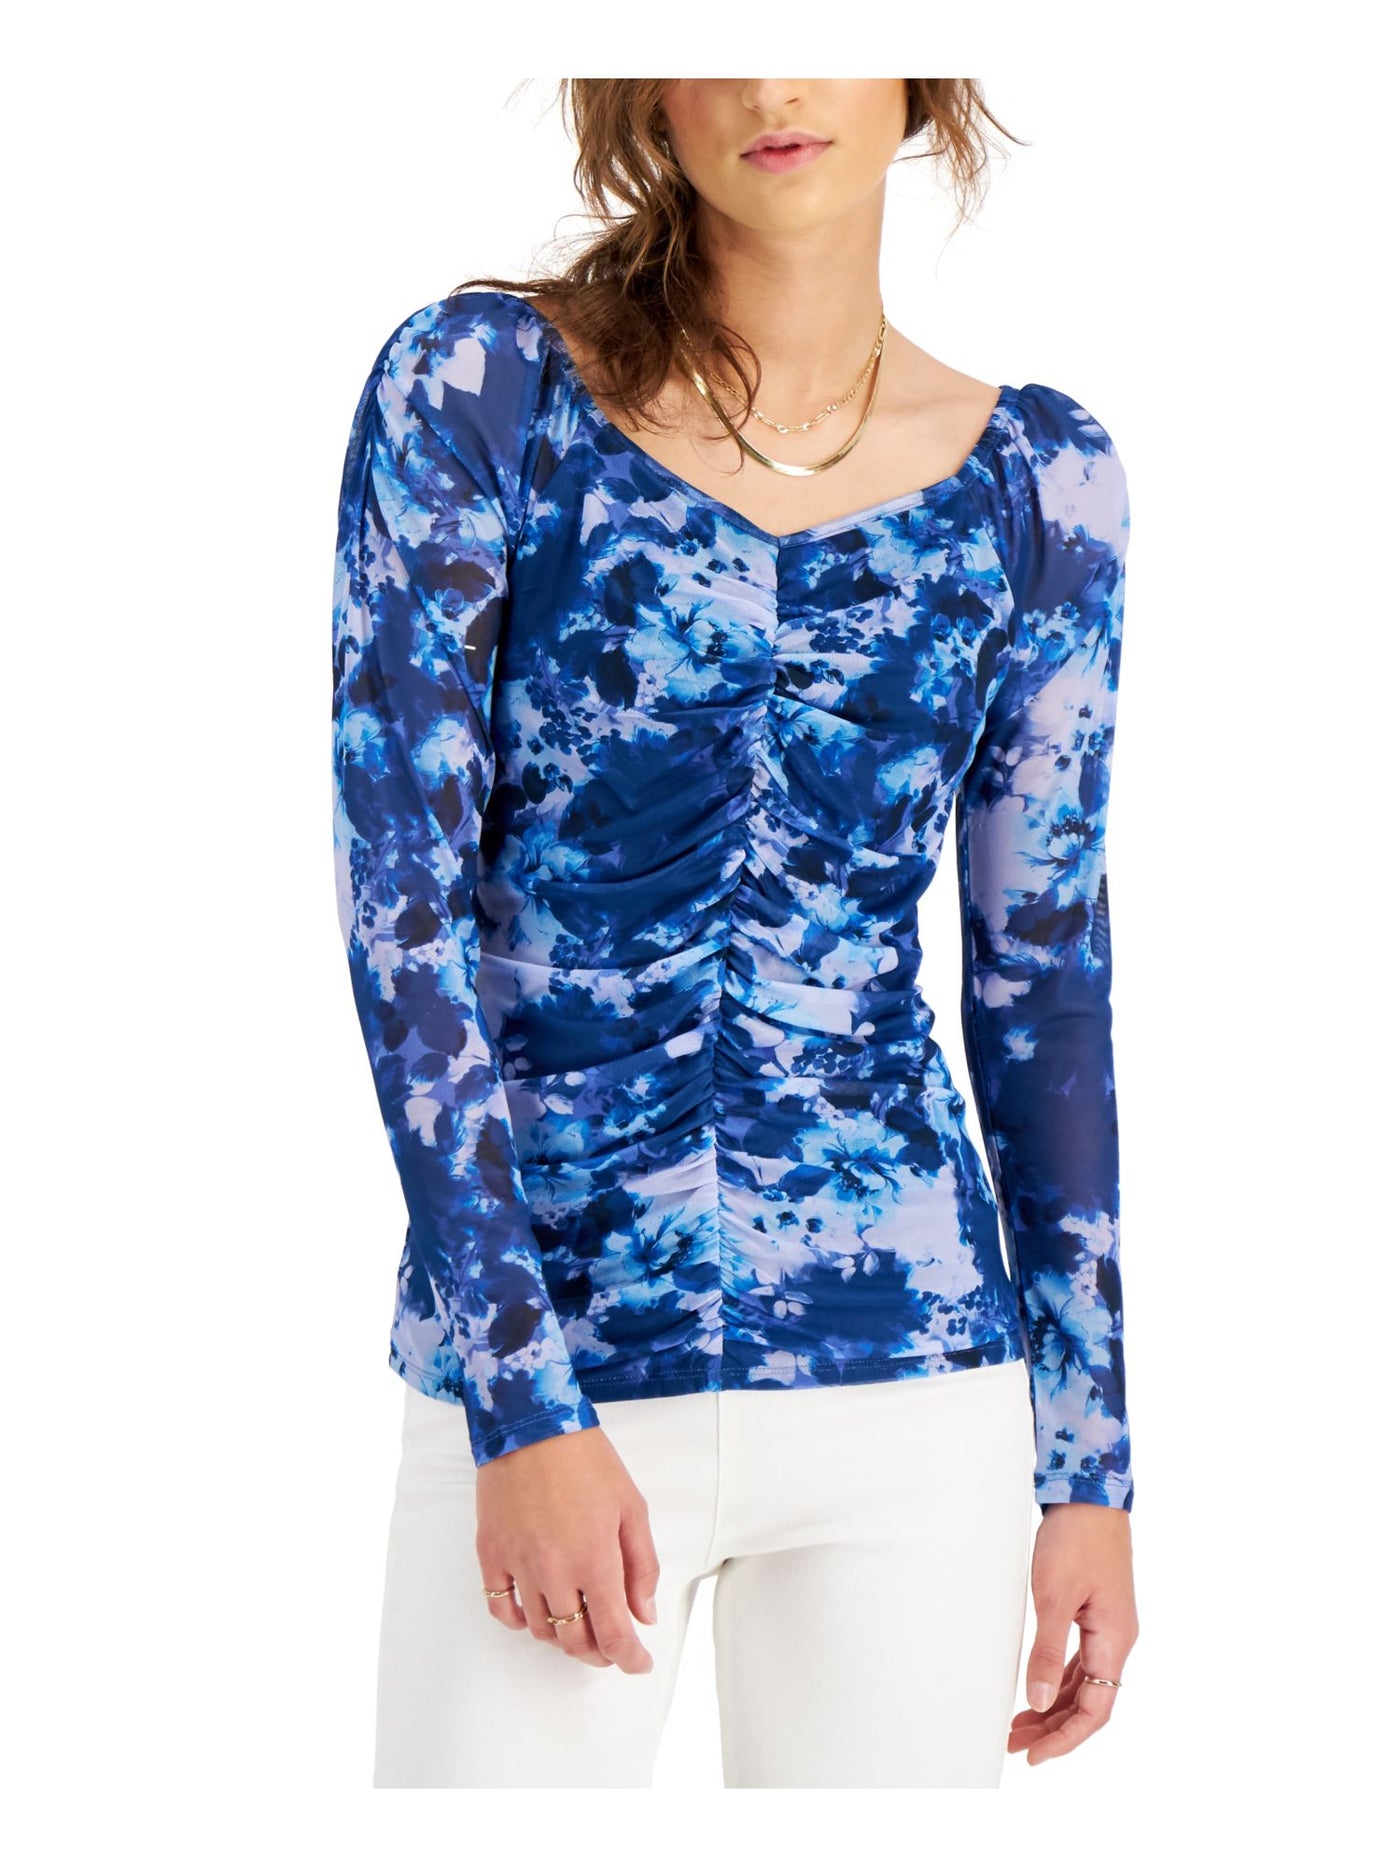 WILLOW DRIVE Womens Blue Ruched Sheer Lined Floral Long Sleeve Sweetheart Neckline Top XS